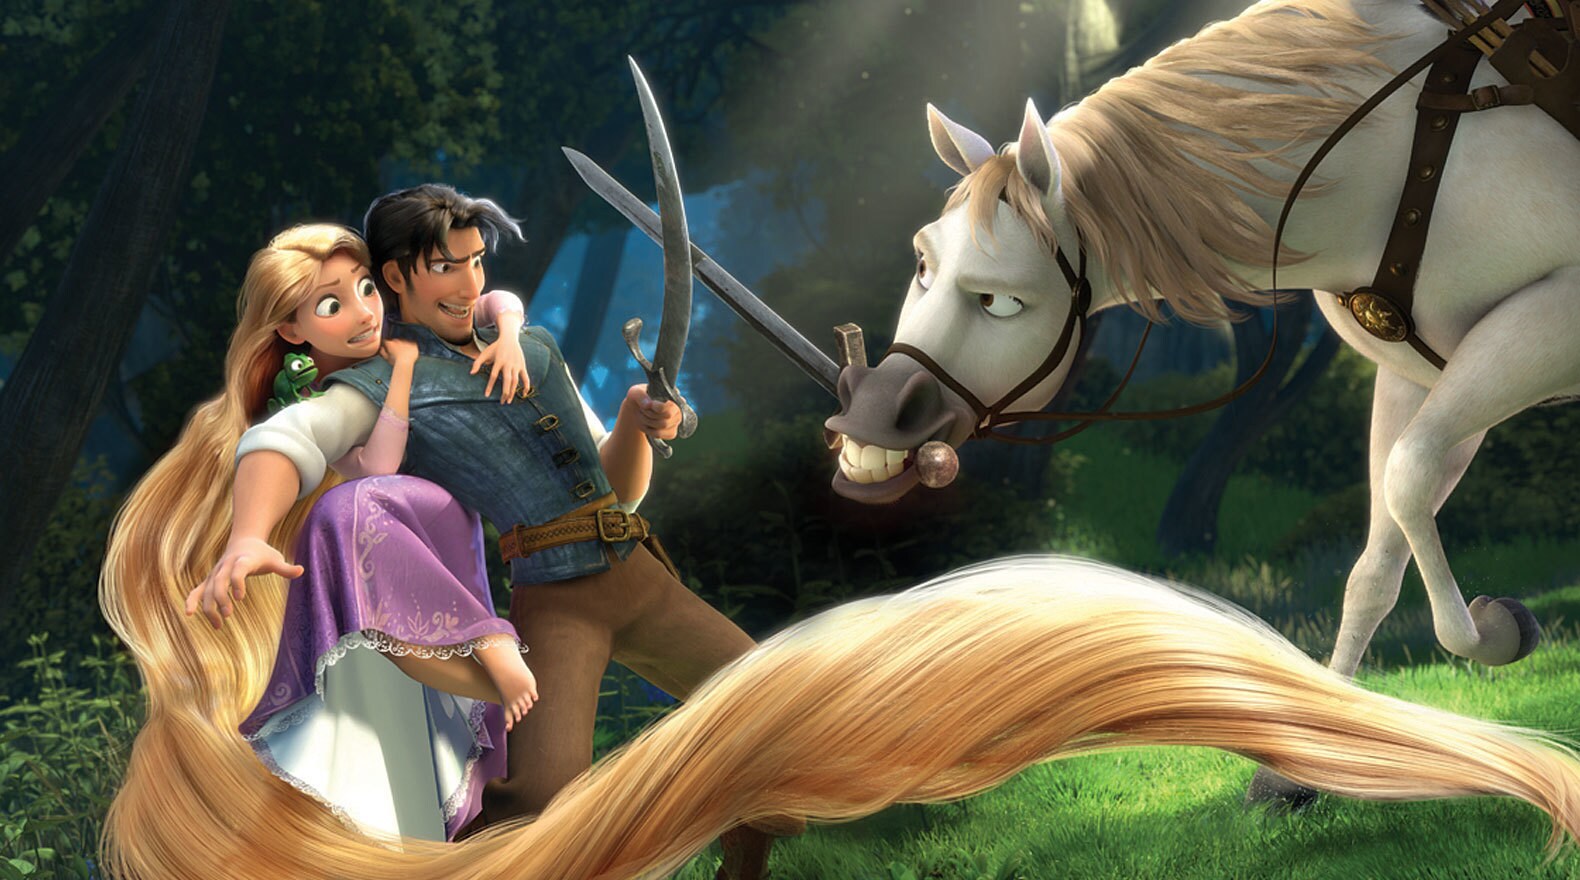 Rapunzel and Flynn Rider come up against Maximus... the horse with a weakness for apples.